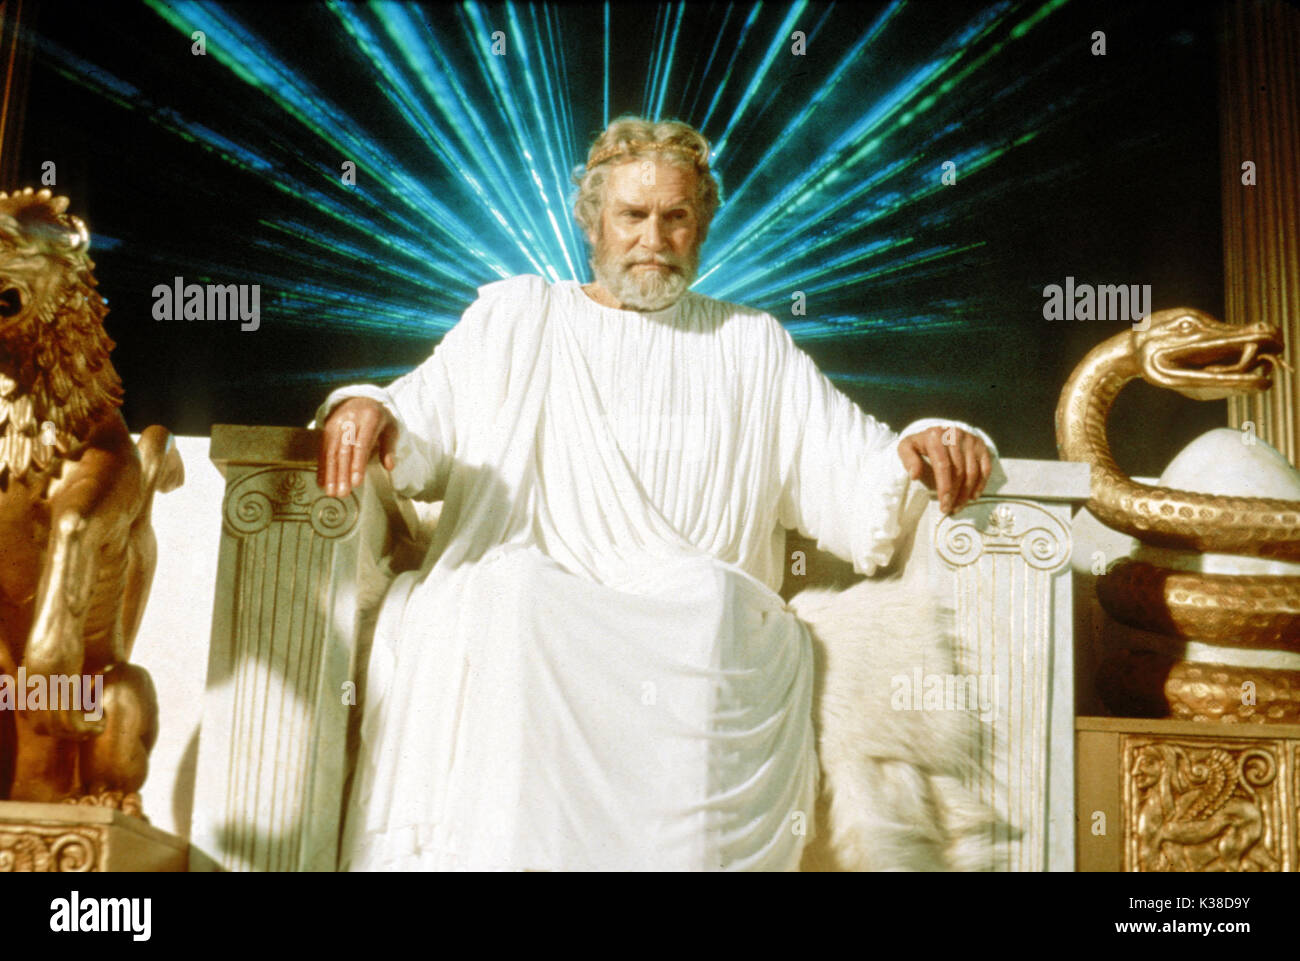 CLASH OF THE TITANS LAURENCE OLIVIER as Zeus     Date: 1981 Stock Photo